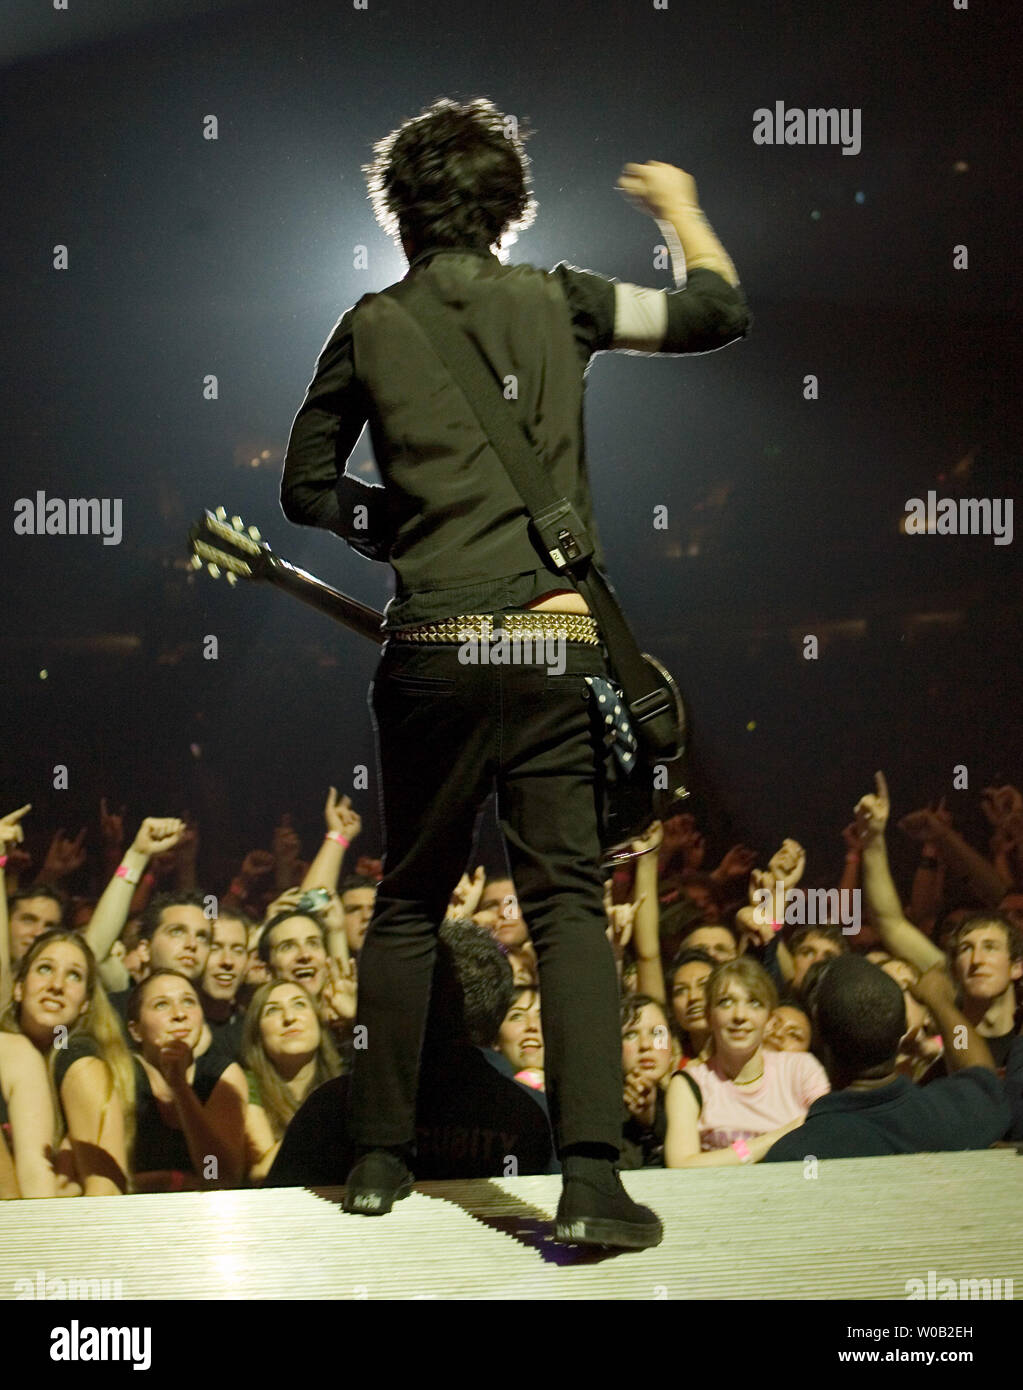 Lead singer Billie Joe Armstrong of the band Green Day performs at a sold out GM Place in Vancouver, British Columbia, September 27, 2005.  (UPI Photo/Heinz Ruckemann) Stock Photo